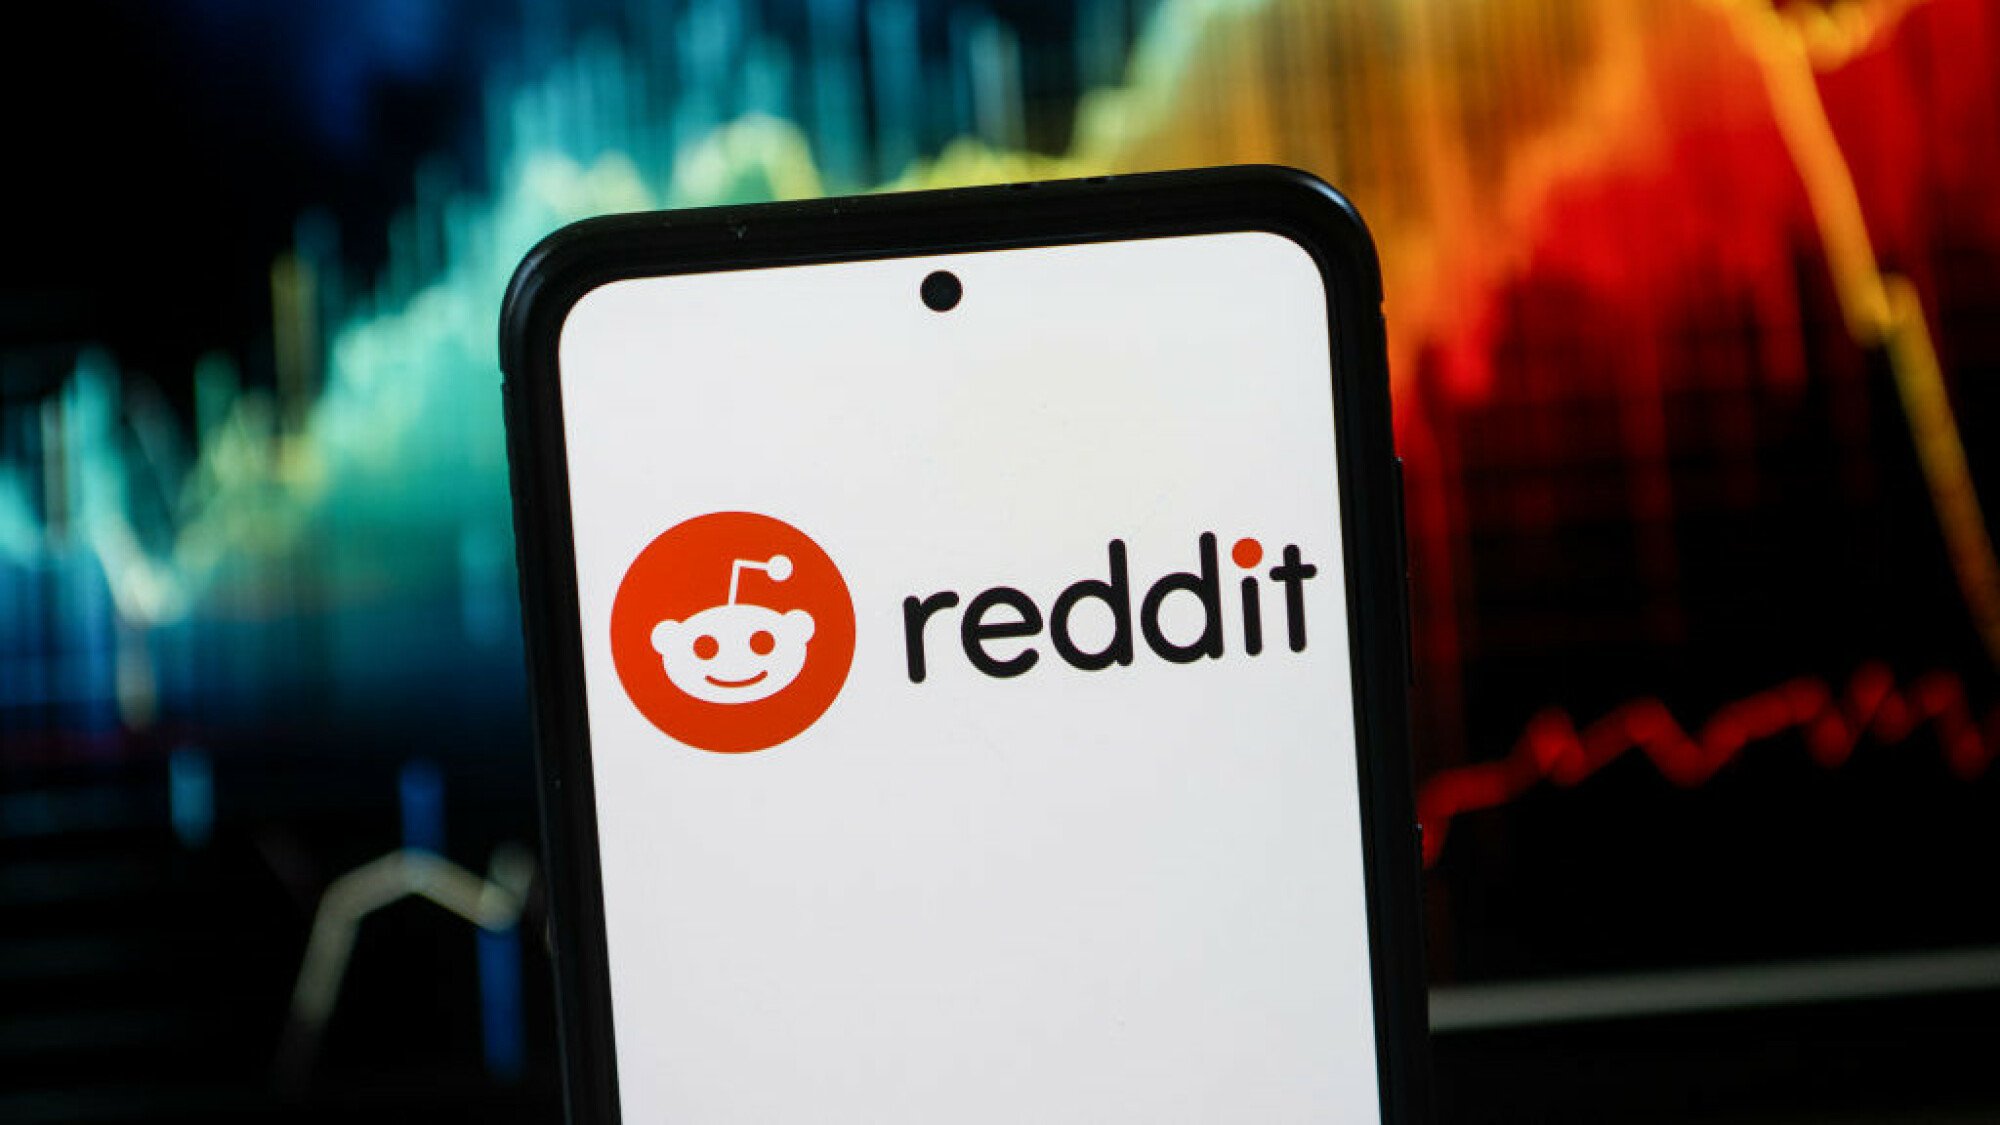 Reddit prices IPO at $34 per share. r/wallstreetbets predicts it will tank.